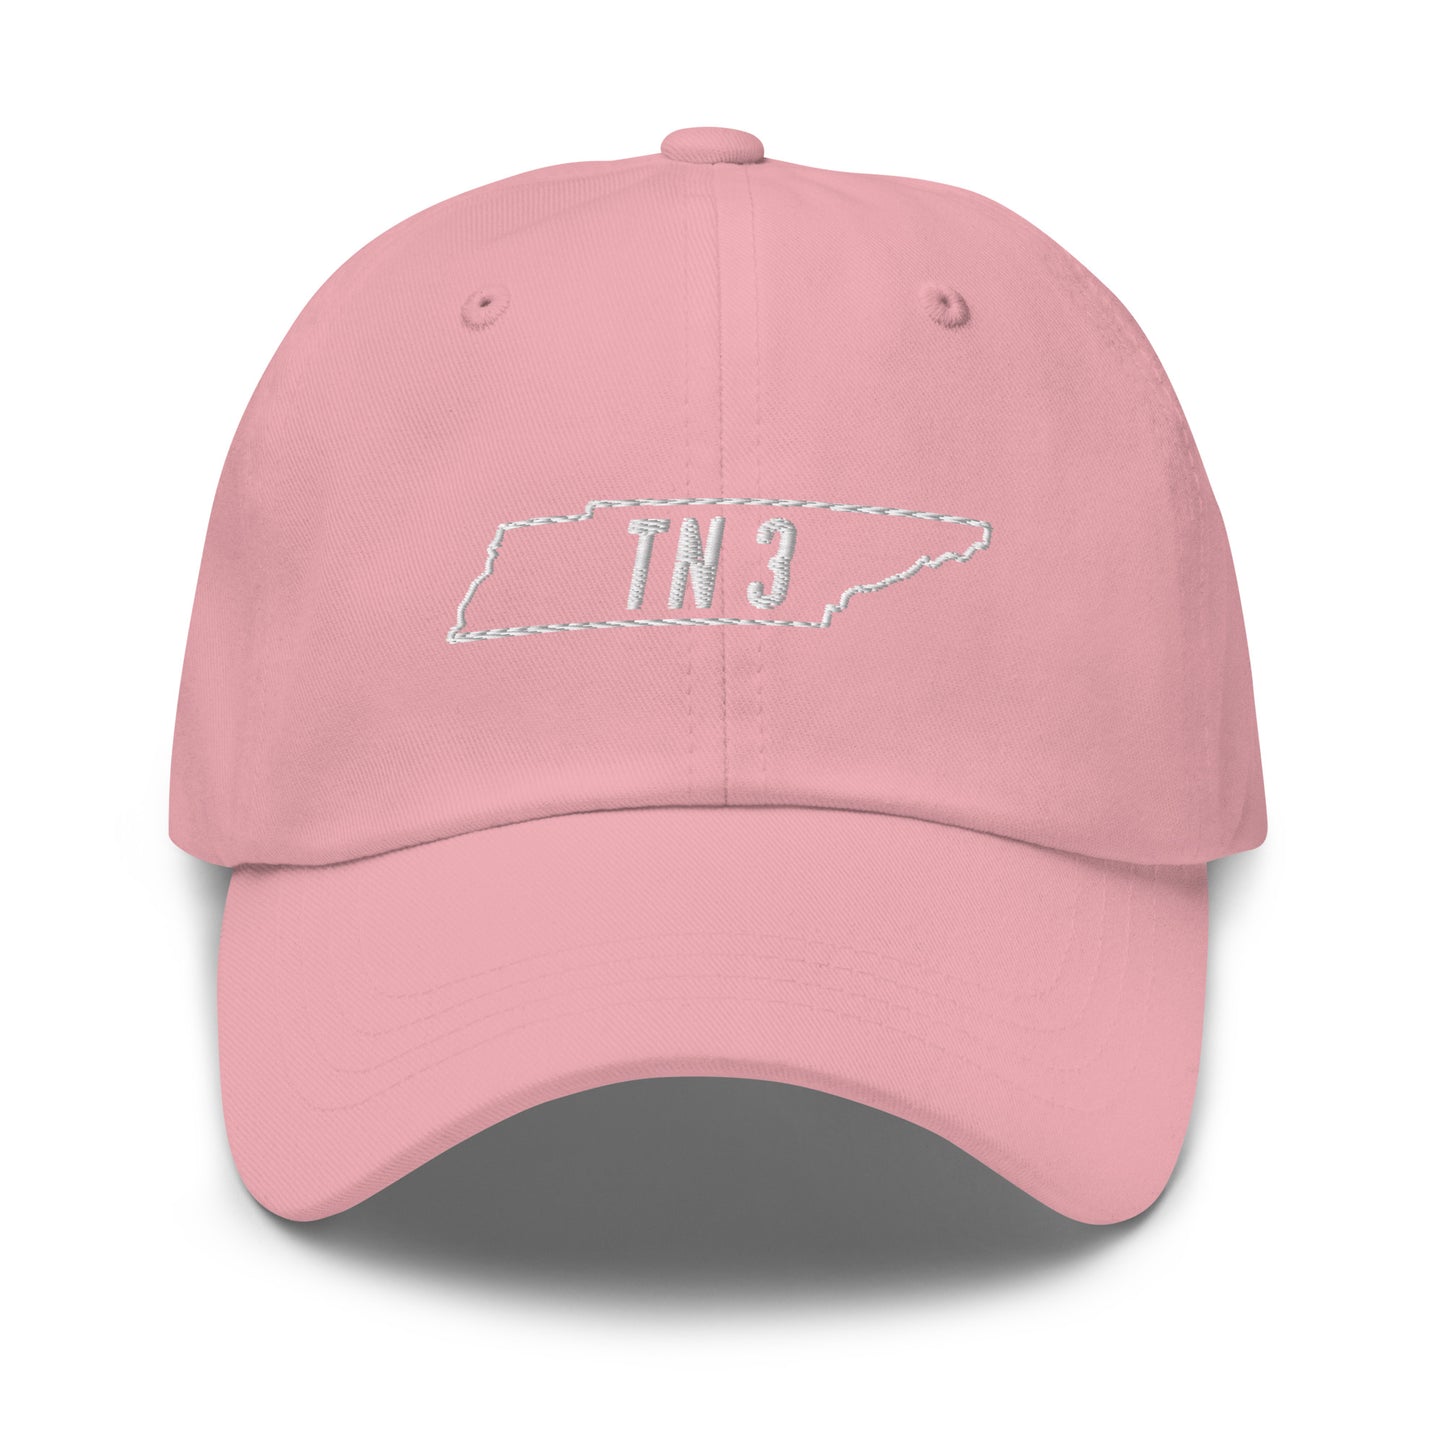 Tennessee 3 Protest Hat